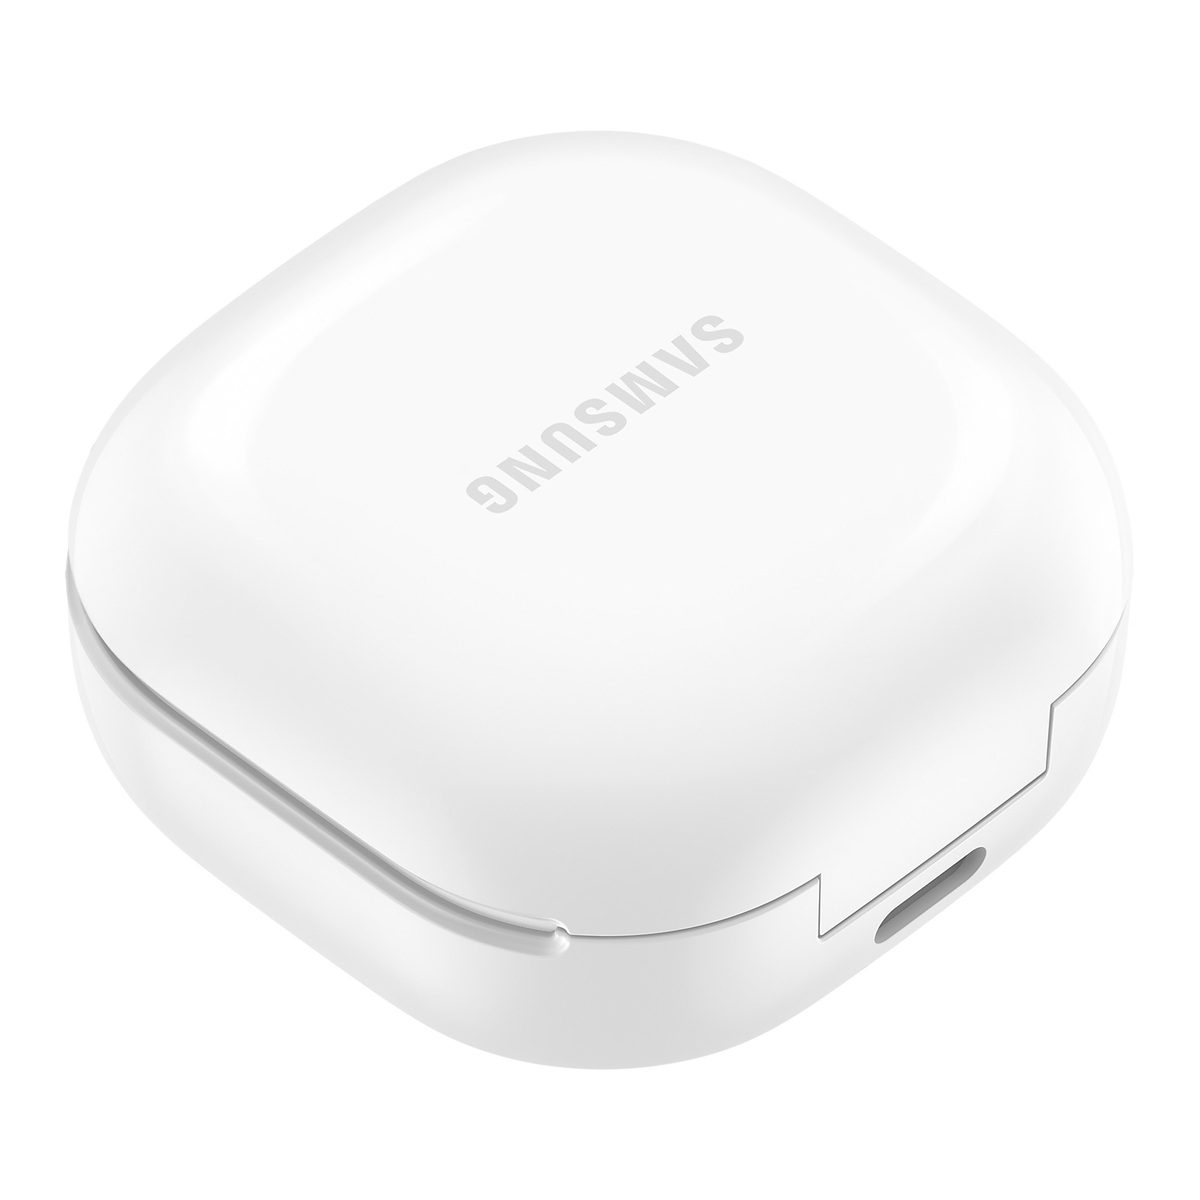 Samsung Galaxy Buds FE with Active Noise Cancellation, White, R400NZW